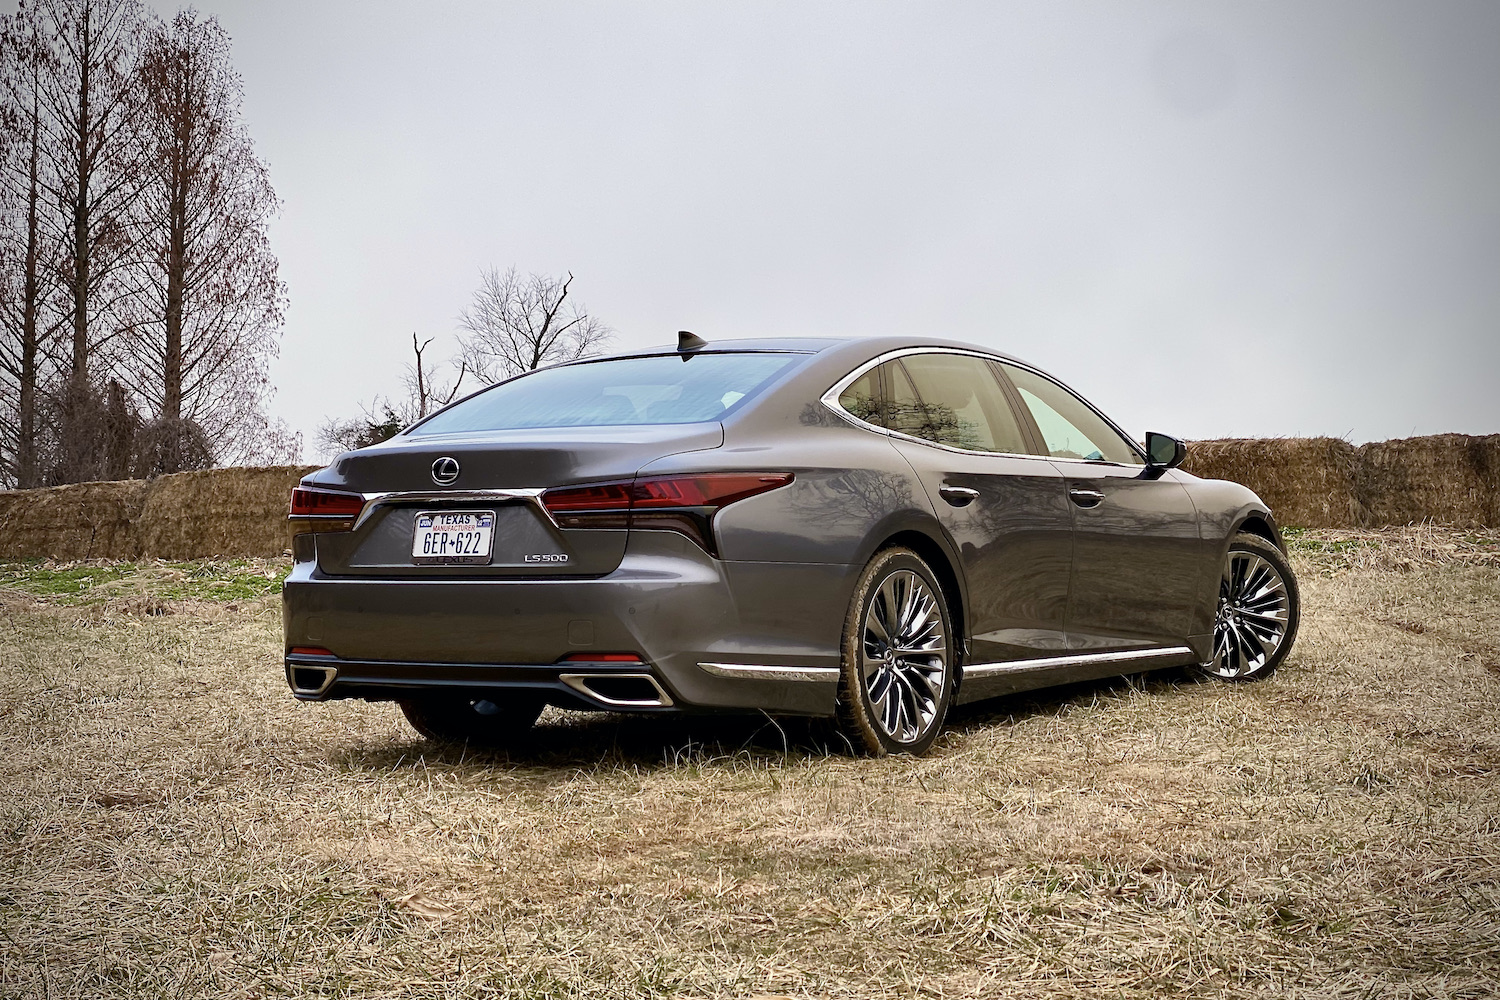 The rear end of the 2021 Lexus LS500 from passenger's side in a grassy field with trees in the back.